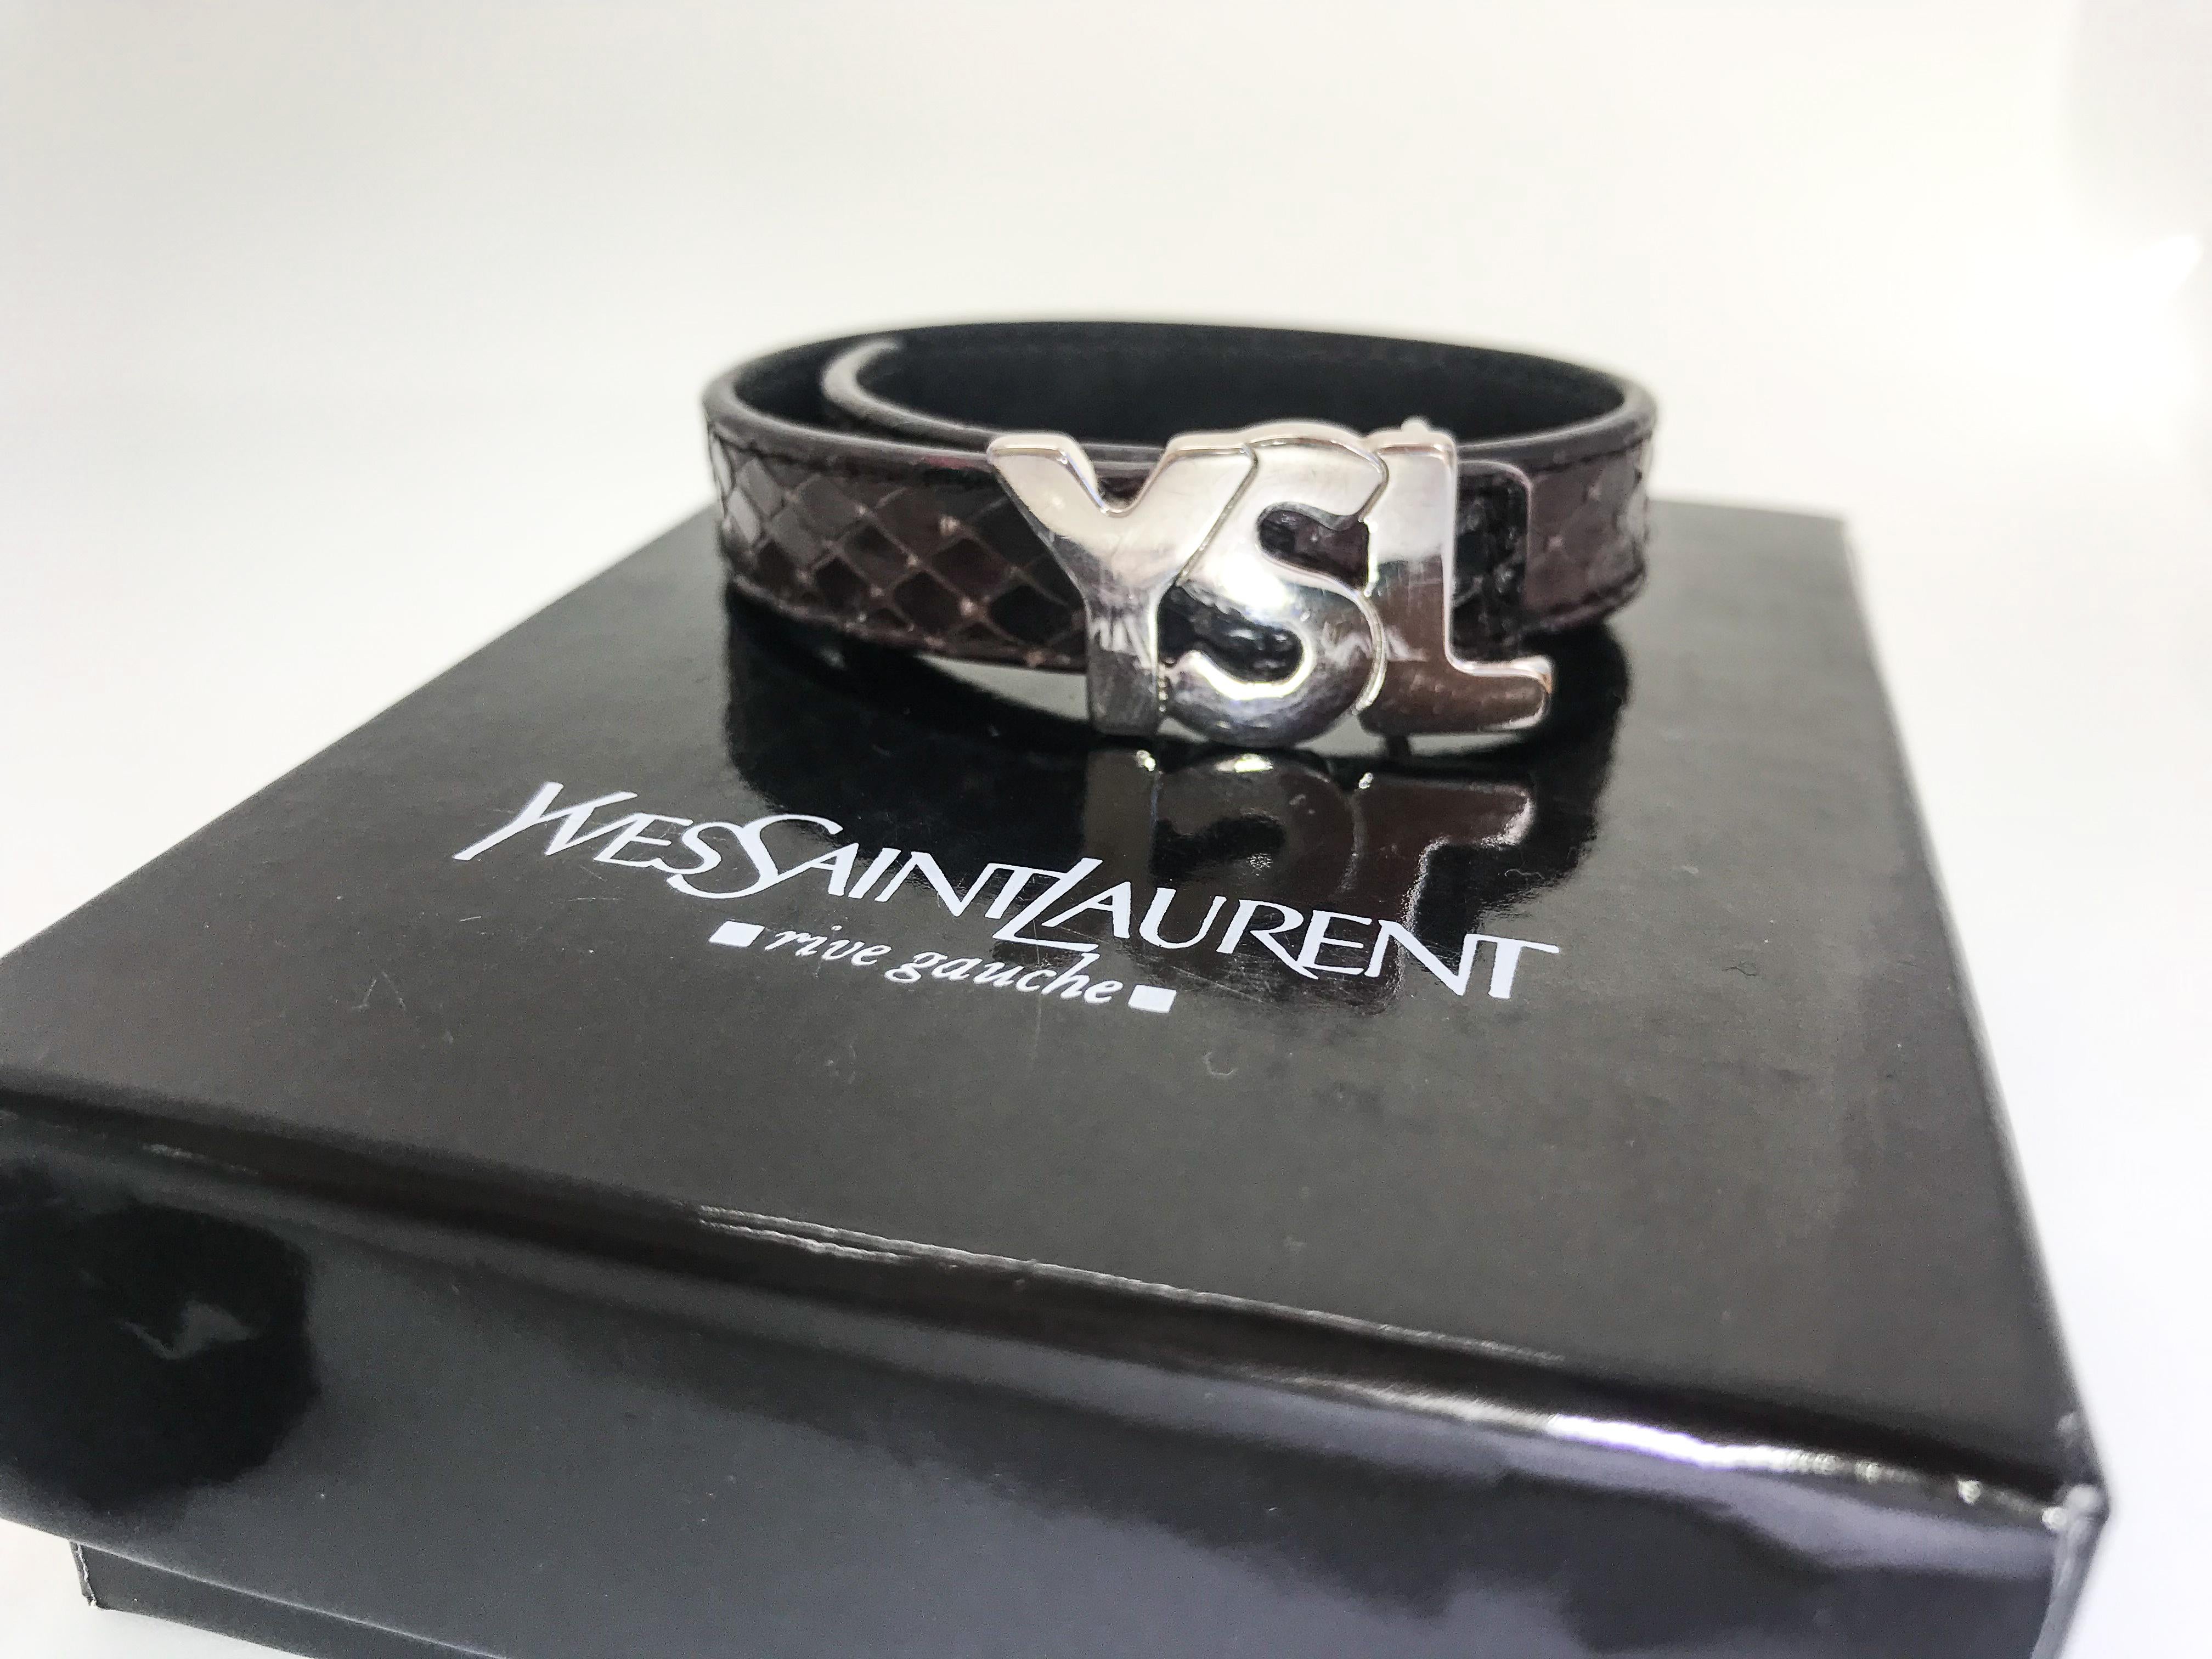 YSL Leather Snakeskin effect Bracelet with logo.

The silver-toned buckle on this adjustable, leather bracelet is a modern take on the classic Yves Saint logo.

Adjustable - 7.5 - 8.5 inches

Size Medium.  Made in Italy

Barcode - EPPY200766B

It